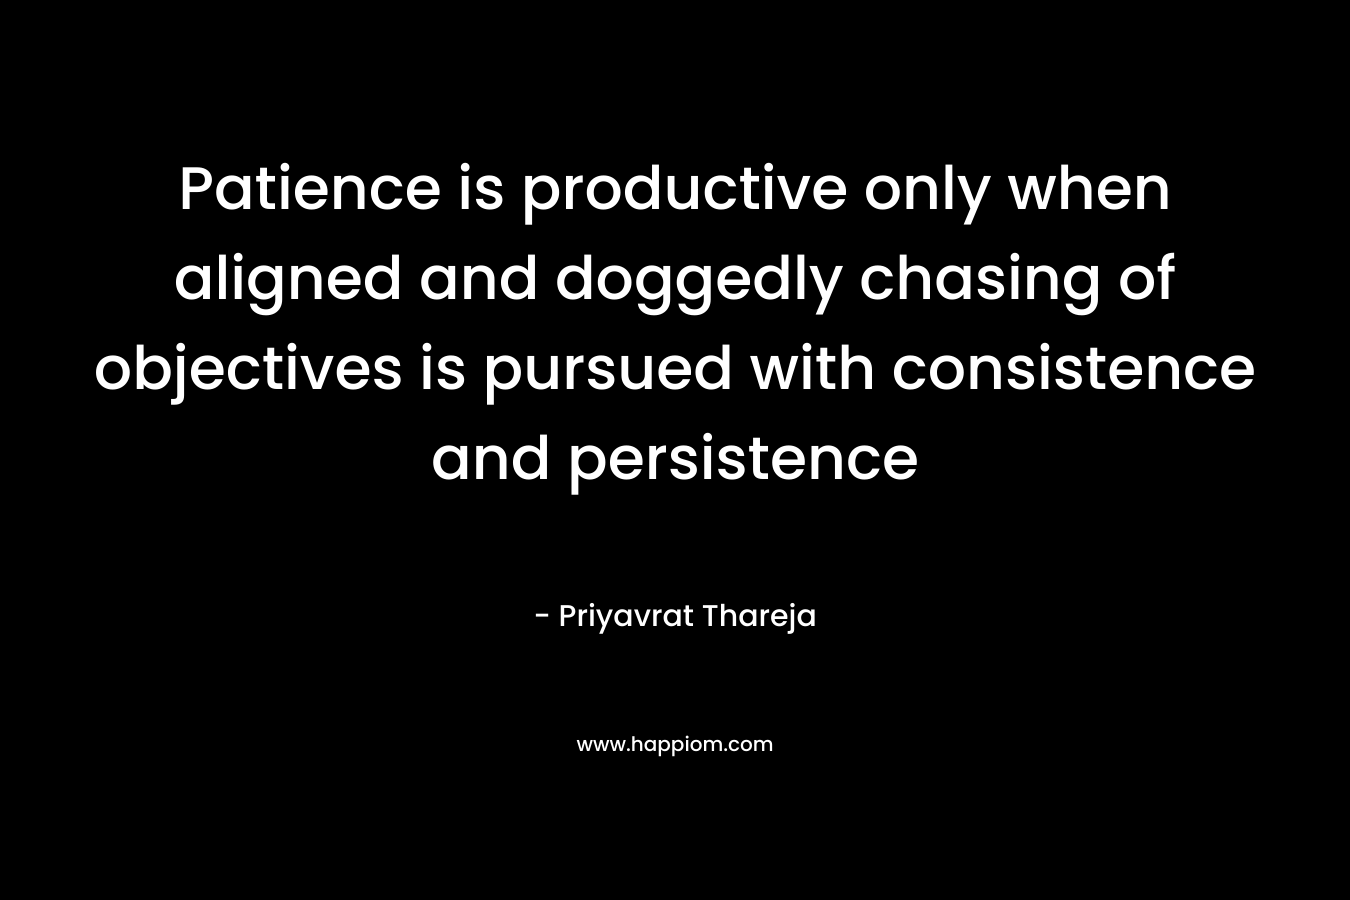 Patience is productive only when aligned and doggedly chasing of objectives is pursued with consistence and persistence – Priyavrat Thareja